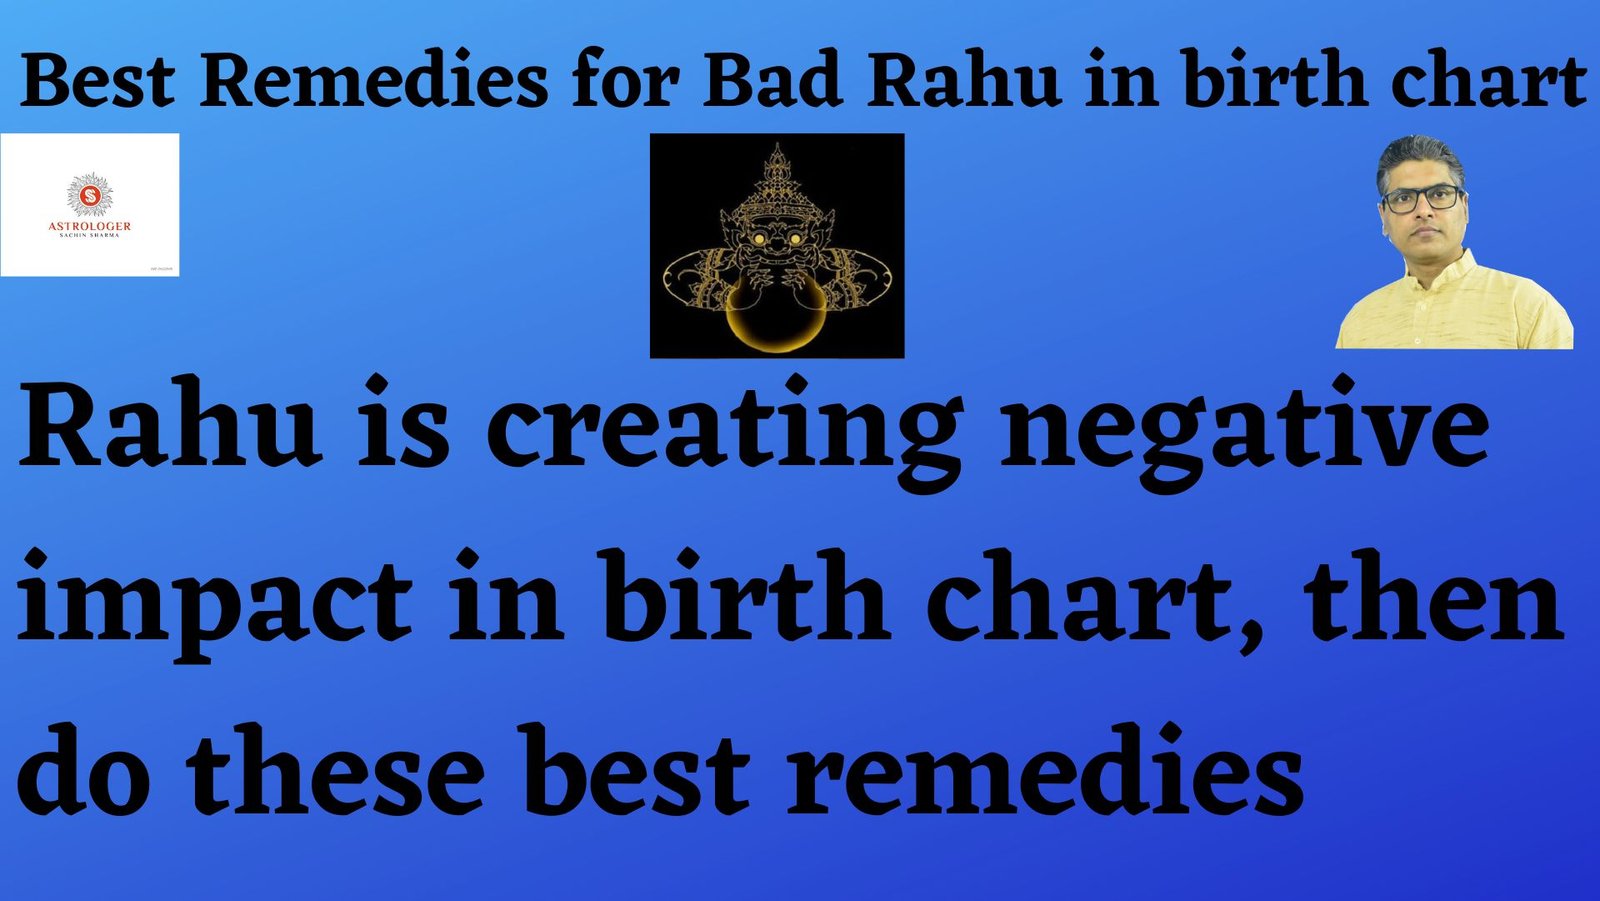 What are the remedies for bad Rahu?